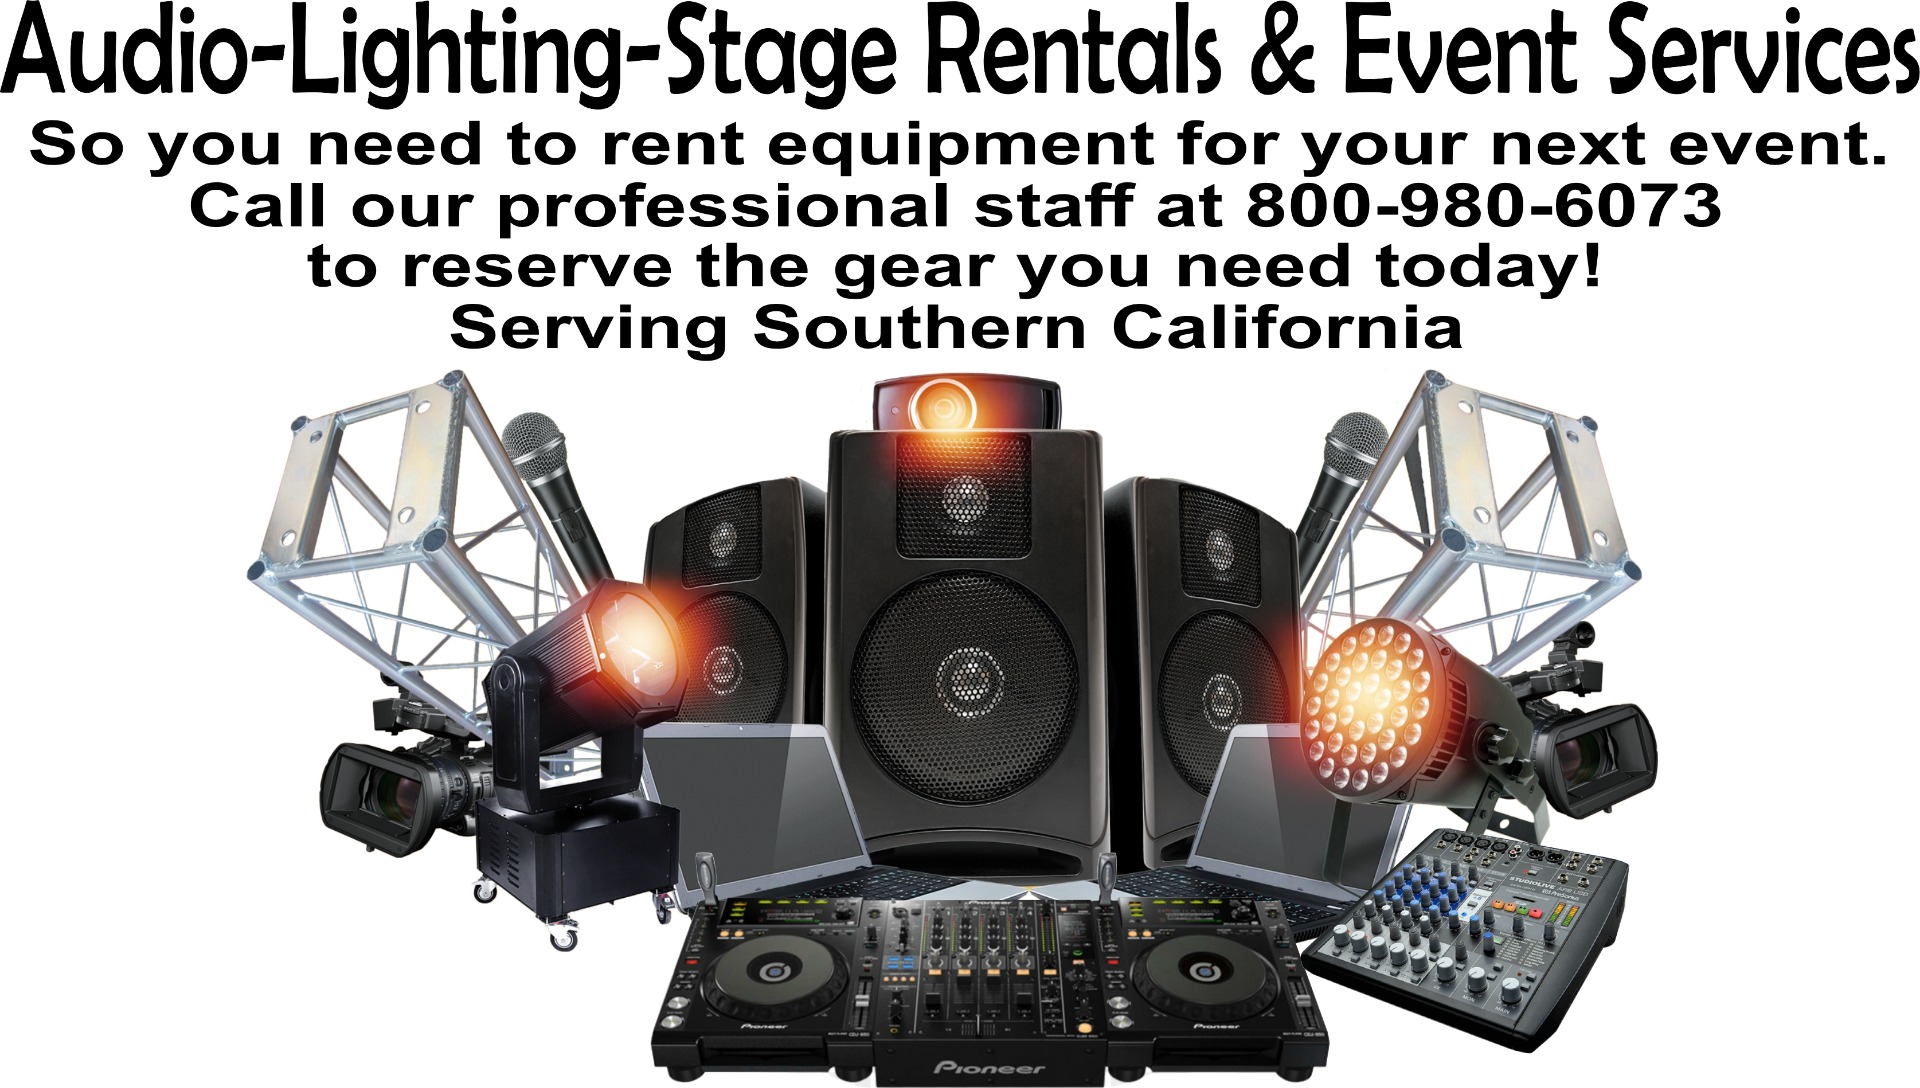 Video / Streaming Lights for Rentals